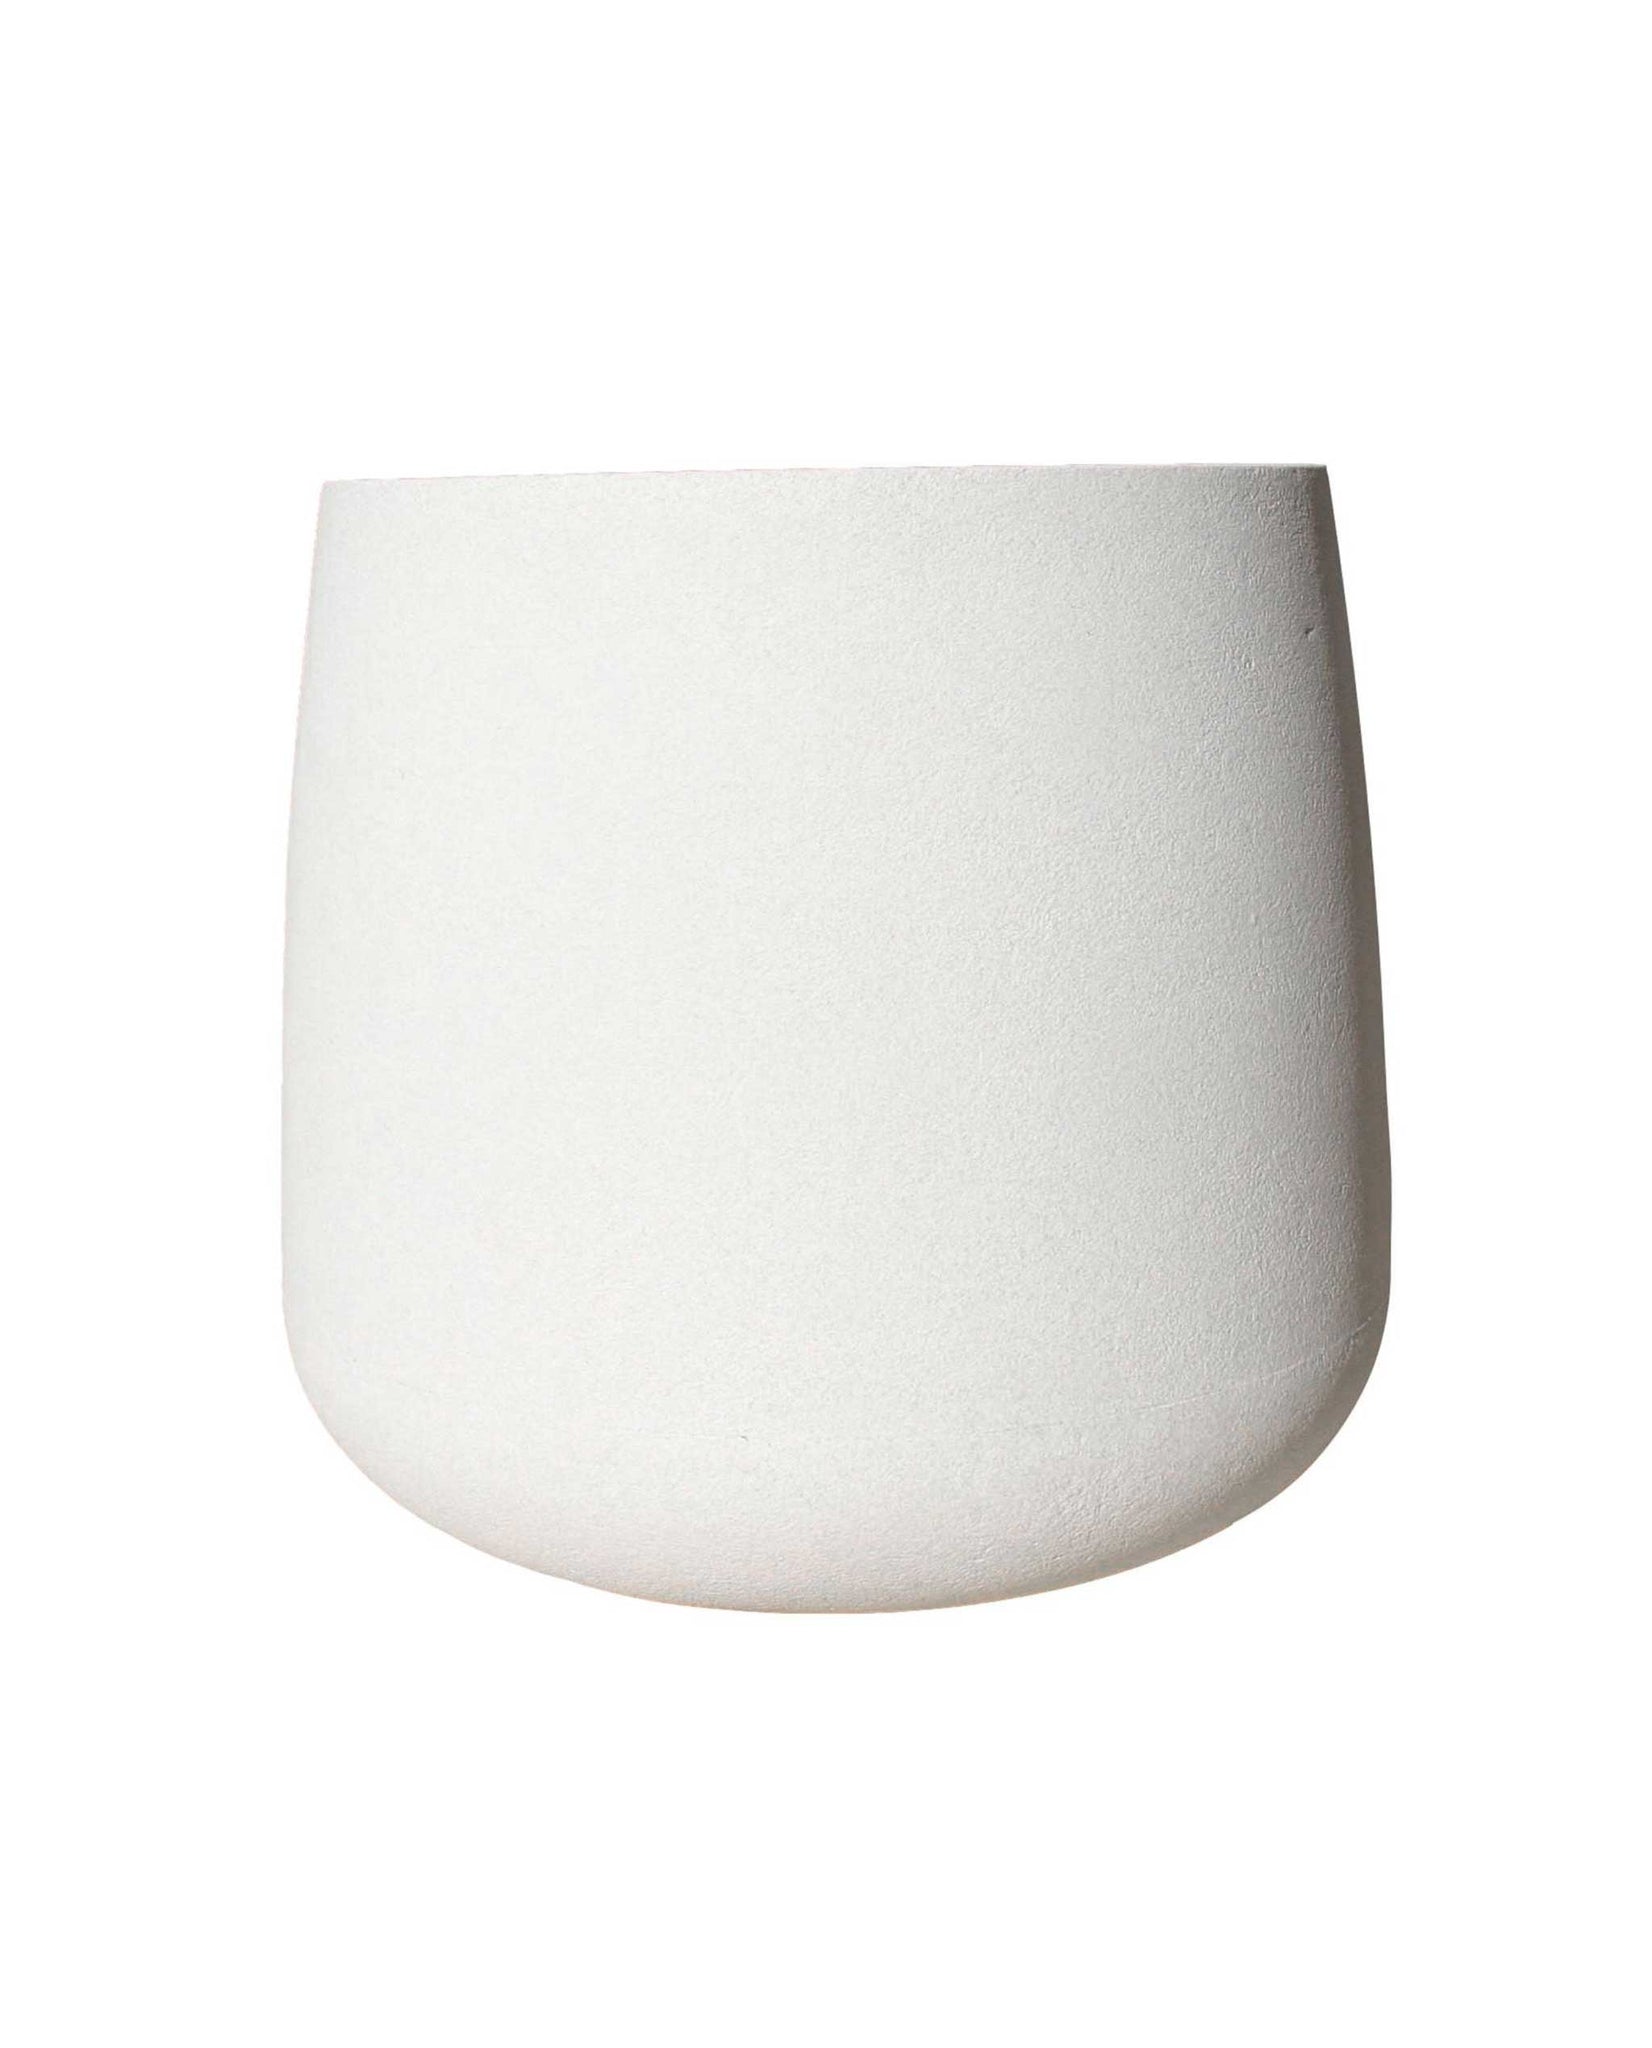 Side view of the medium Bios plant pot showing  the beautiful  textured finish and clean straight upright lines of the pot in colour off-white. Orders at Florastyle by Hingham.